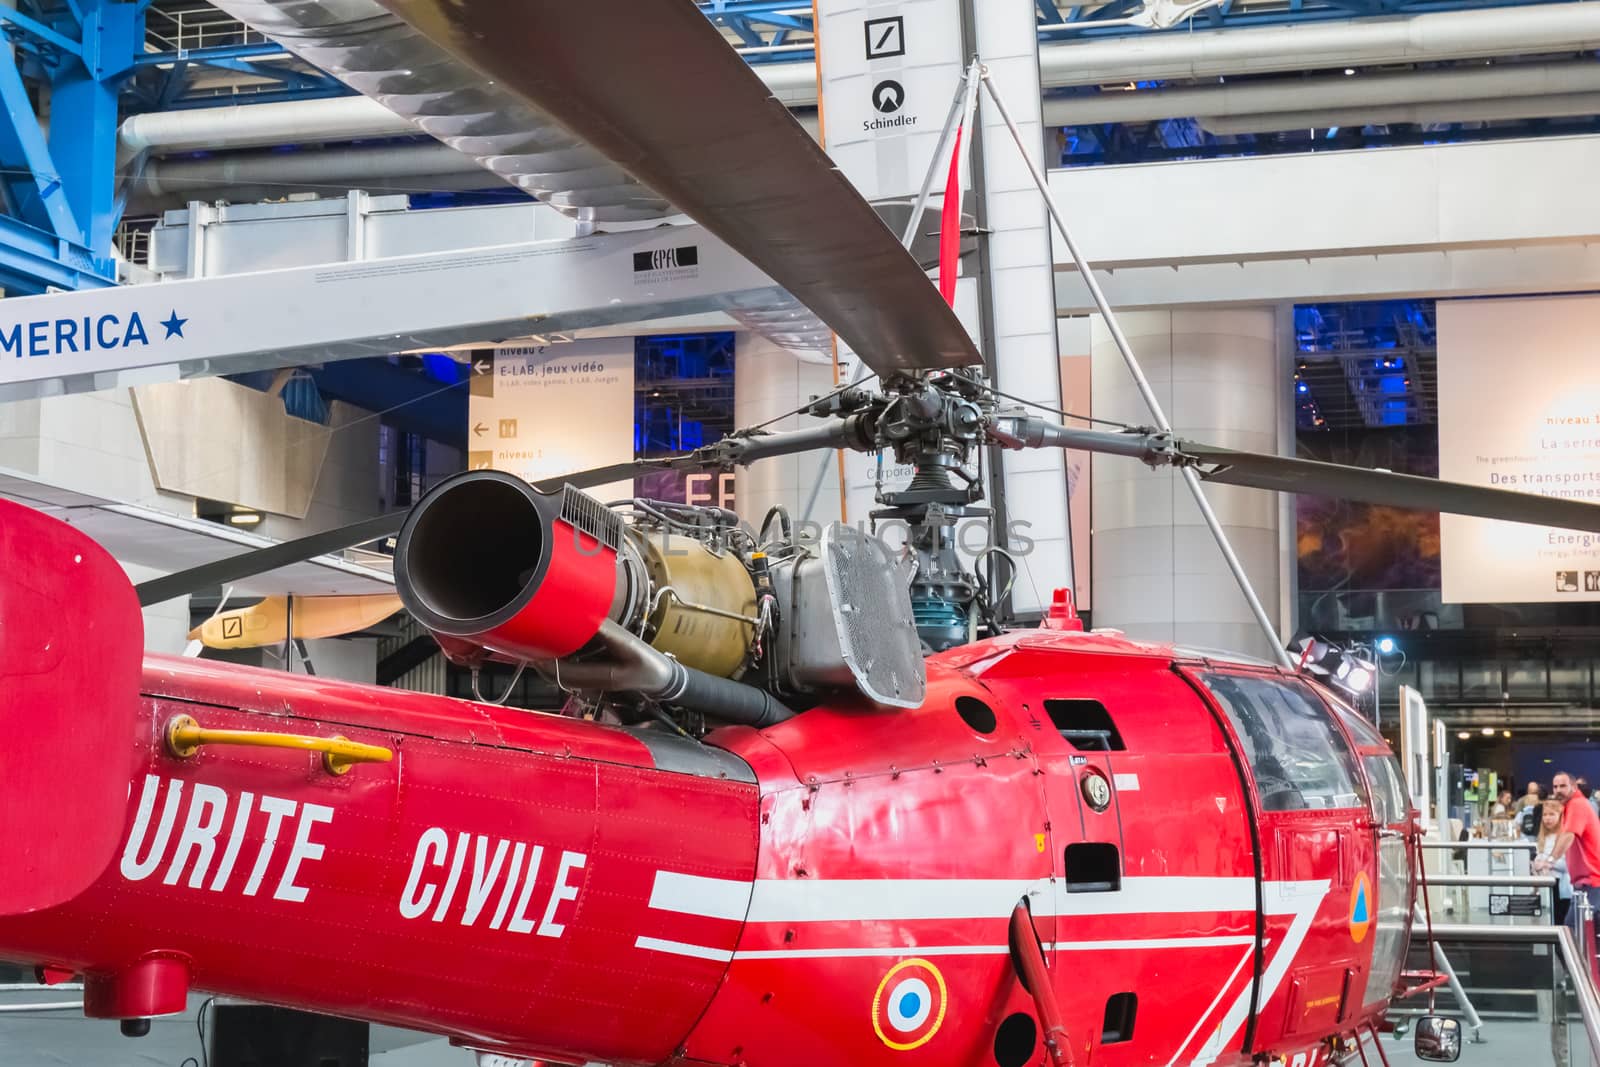 Old Red Helicopter of Civil Security exhibited at the entrance o by AtlanticEUROSTOXX